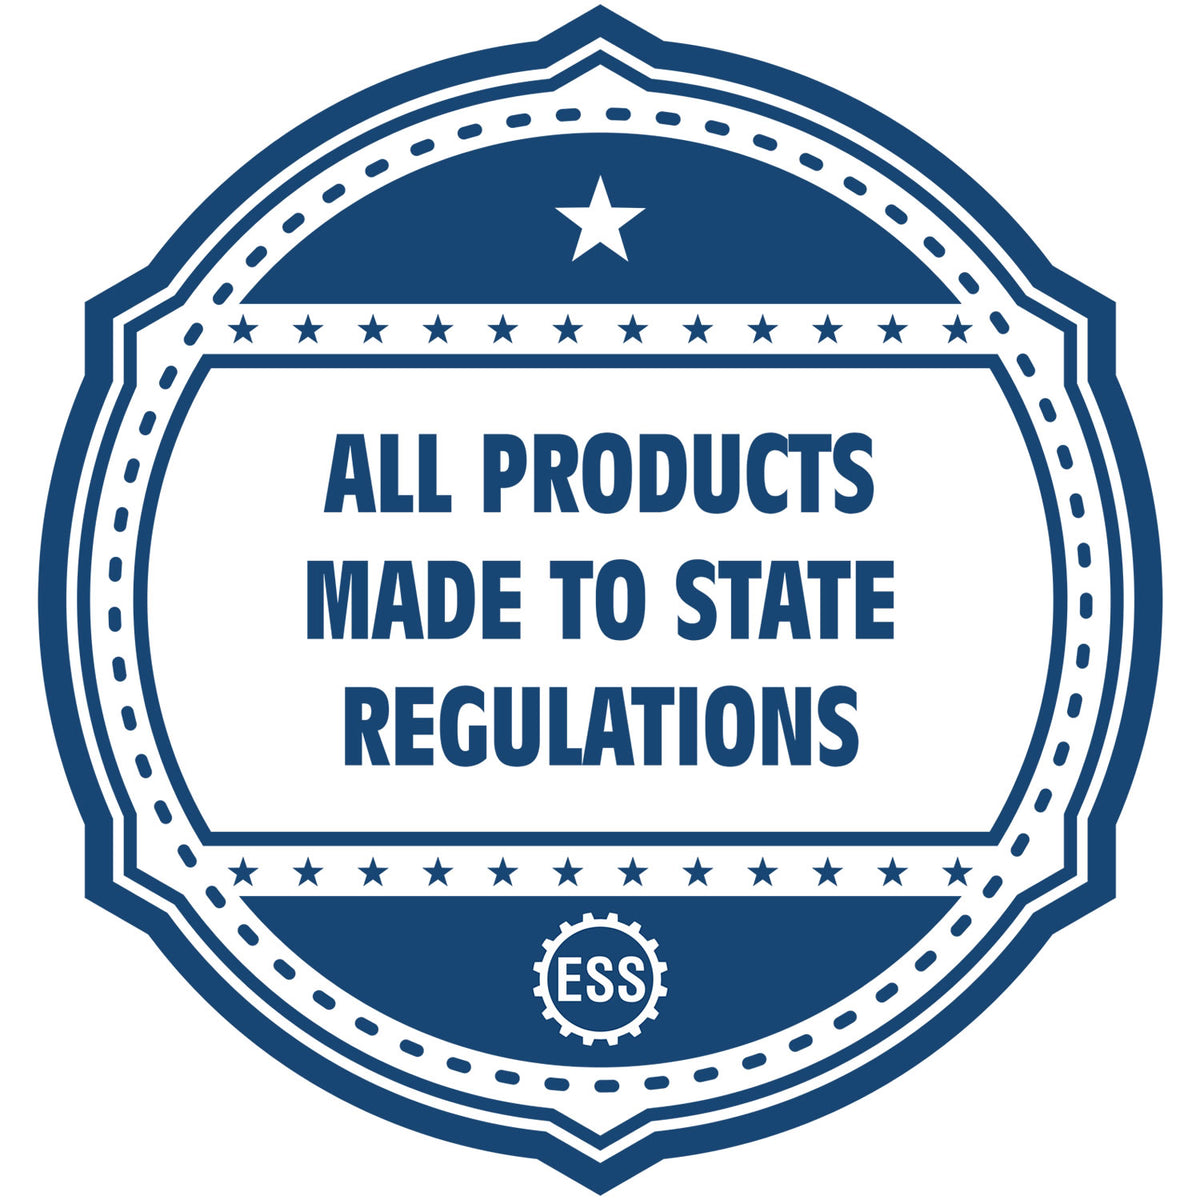 An icon or badge element for the State of Alaska Long Reach Architectural Embossing Seal showing that this product is made in compliance with state regulations.